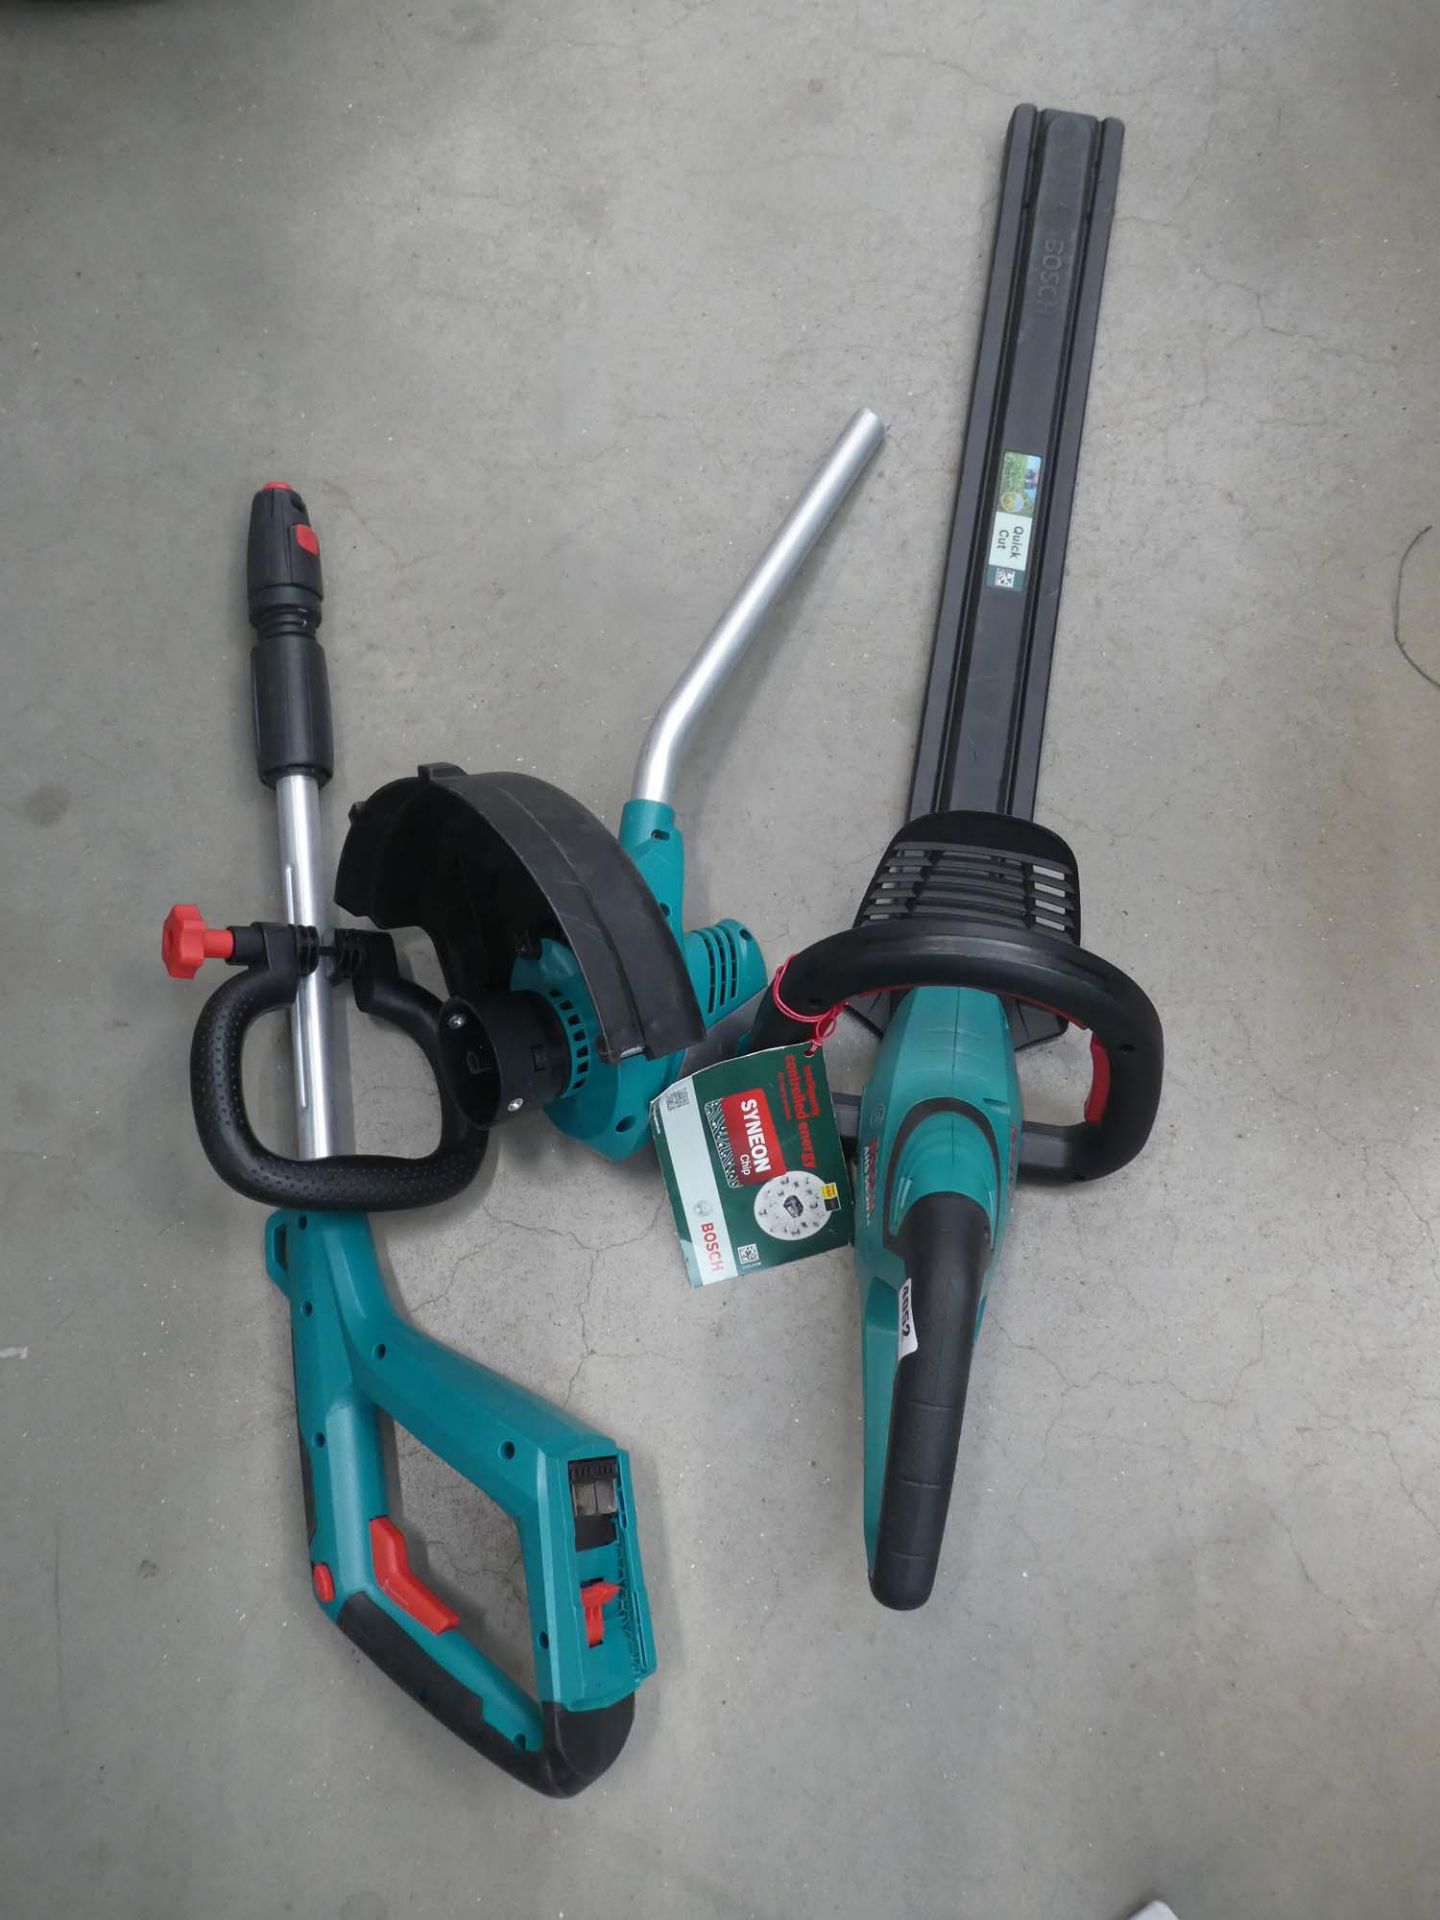 Bosch battery powered hedgecutter and strimmer (broken head, no battery or charger)